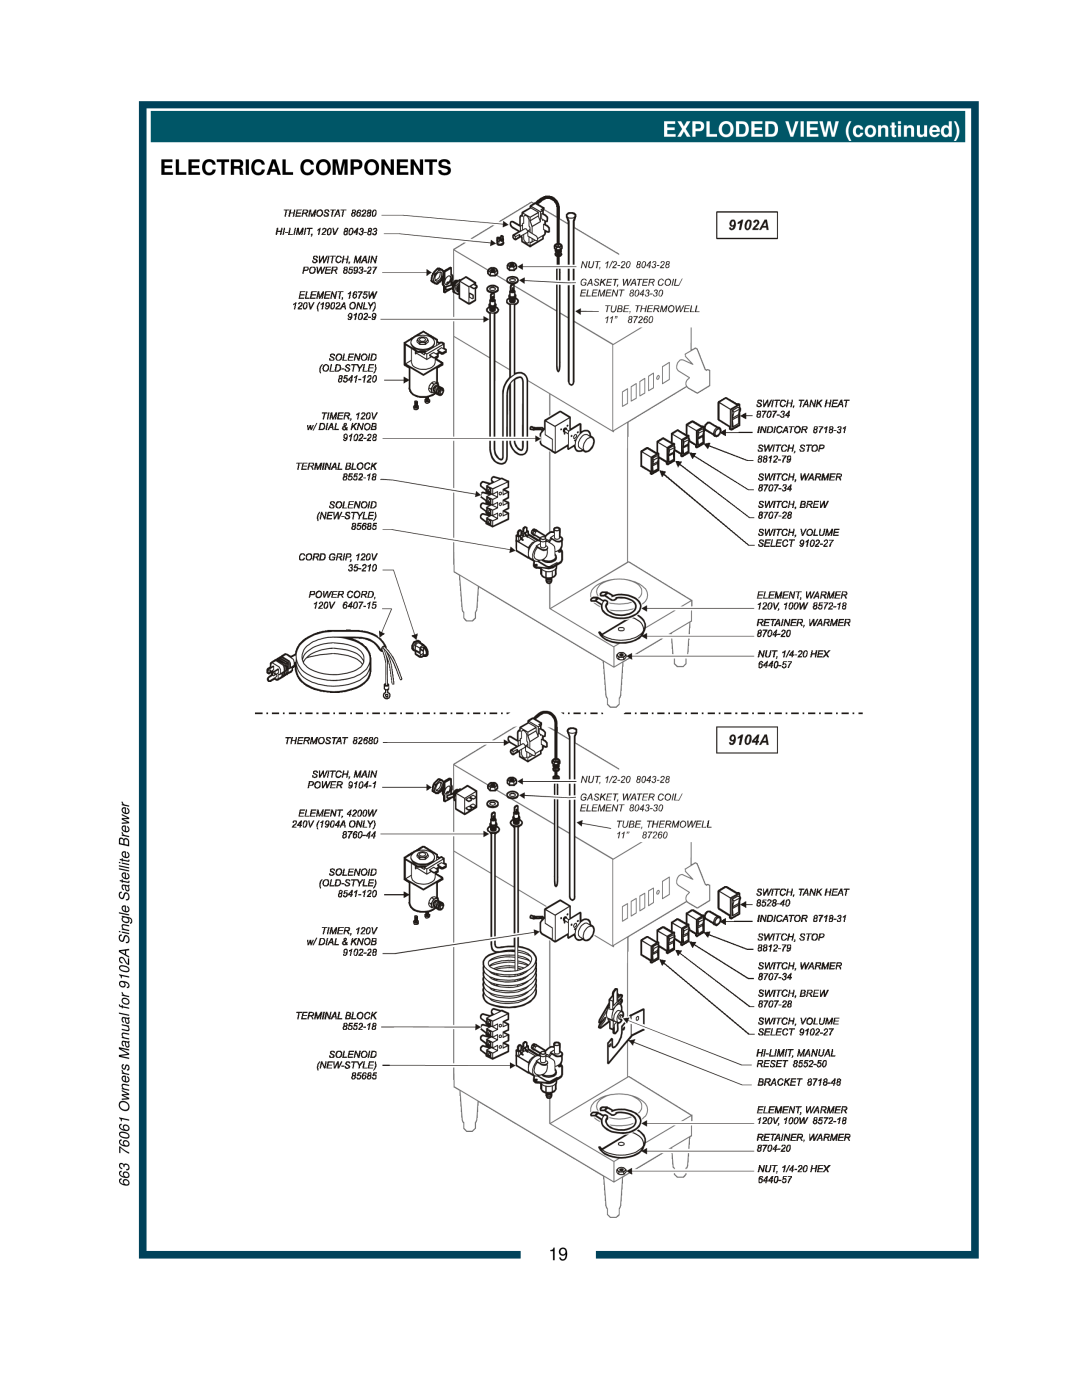 Bloomfield 9104A, 9102A owner manual Electrical Components, EXPLODED VIEW continued 